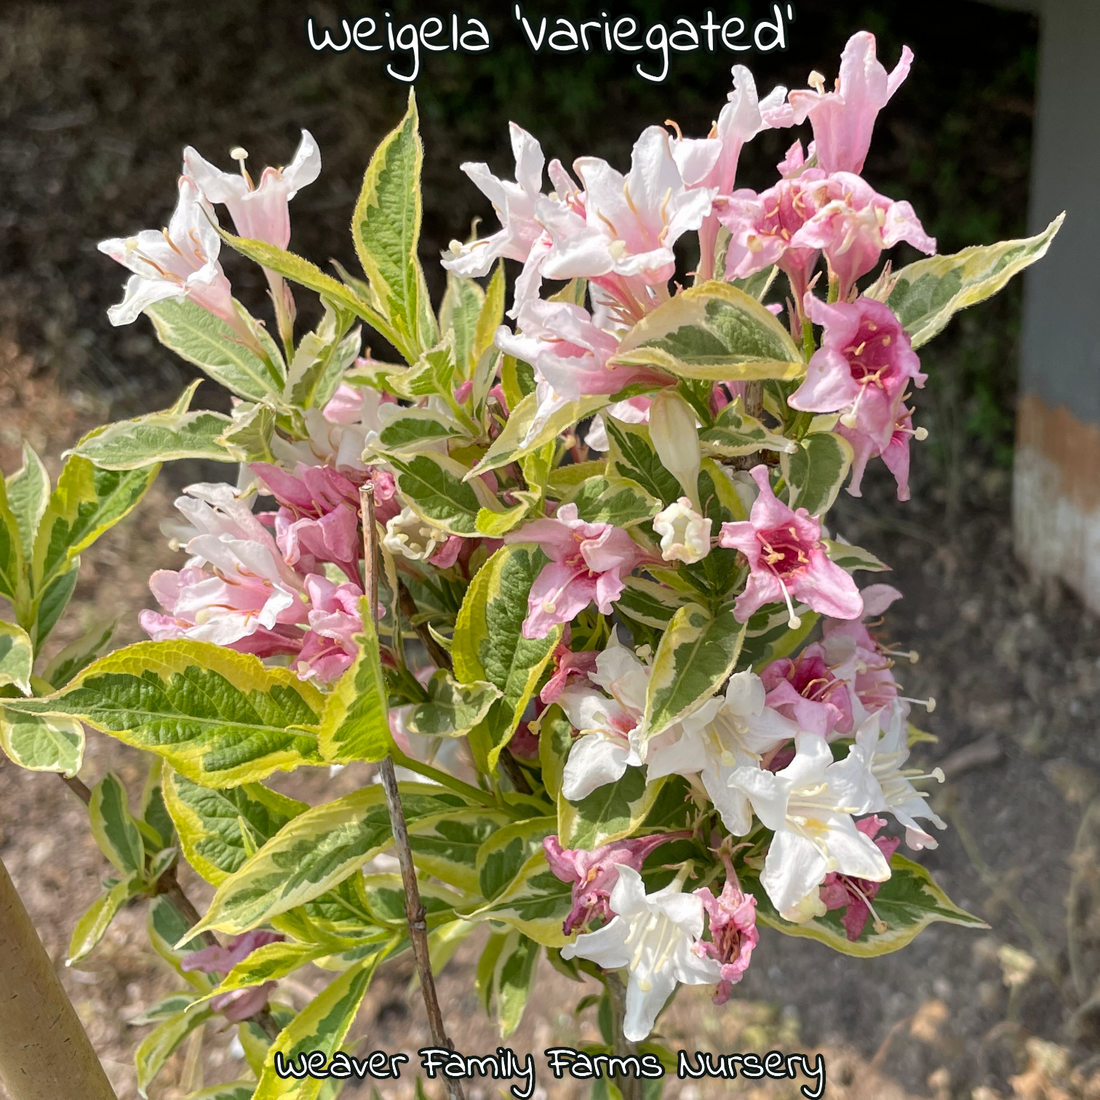 What Does A Variegated Weigela Look Like?